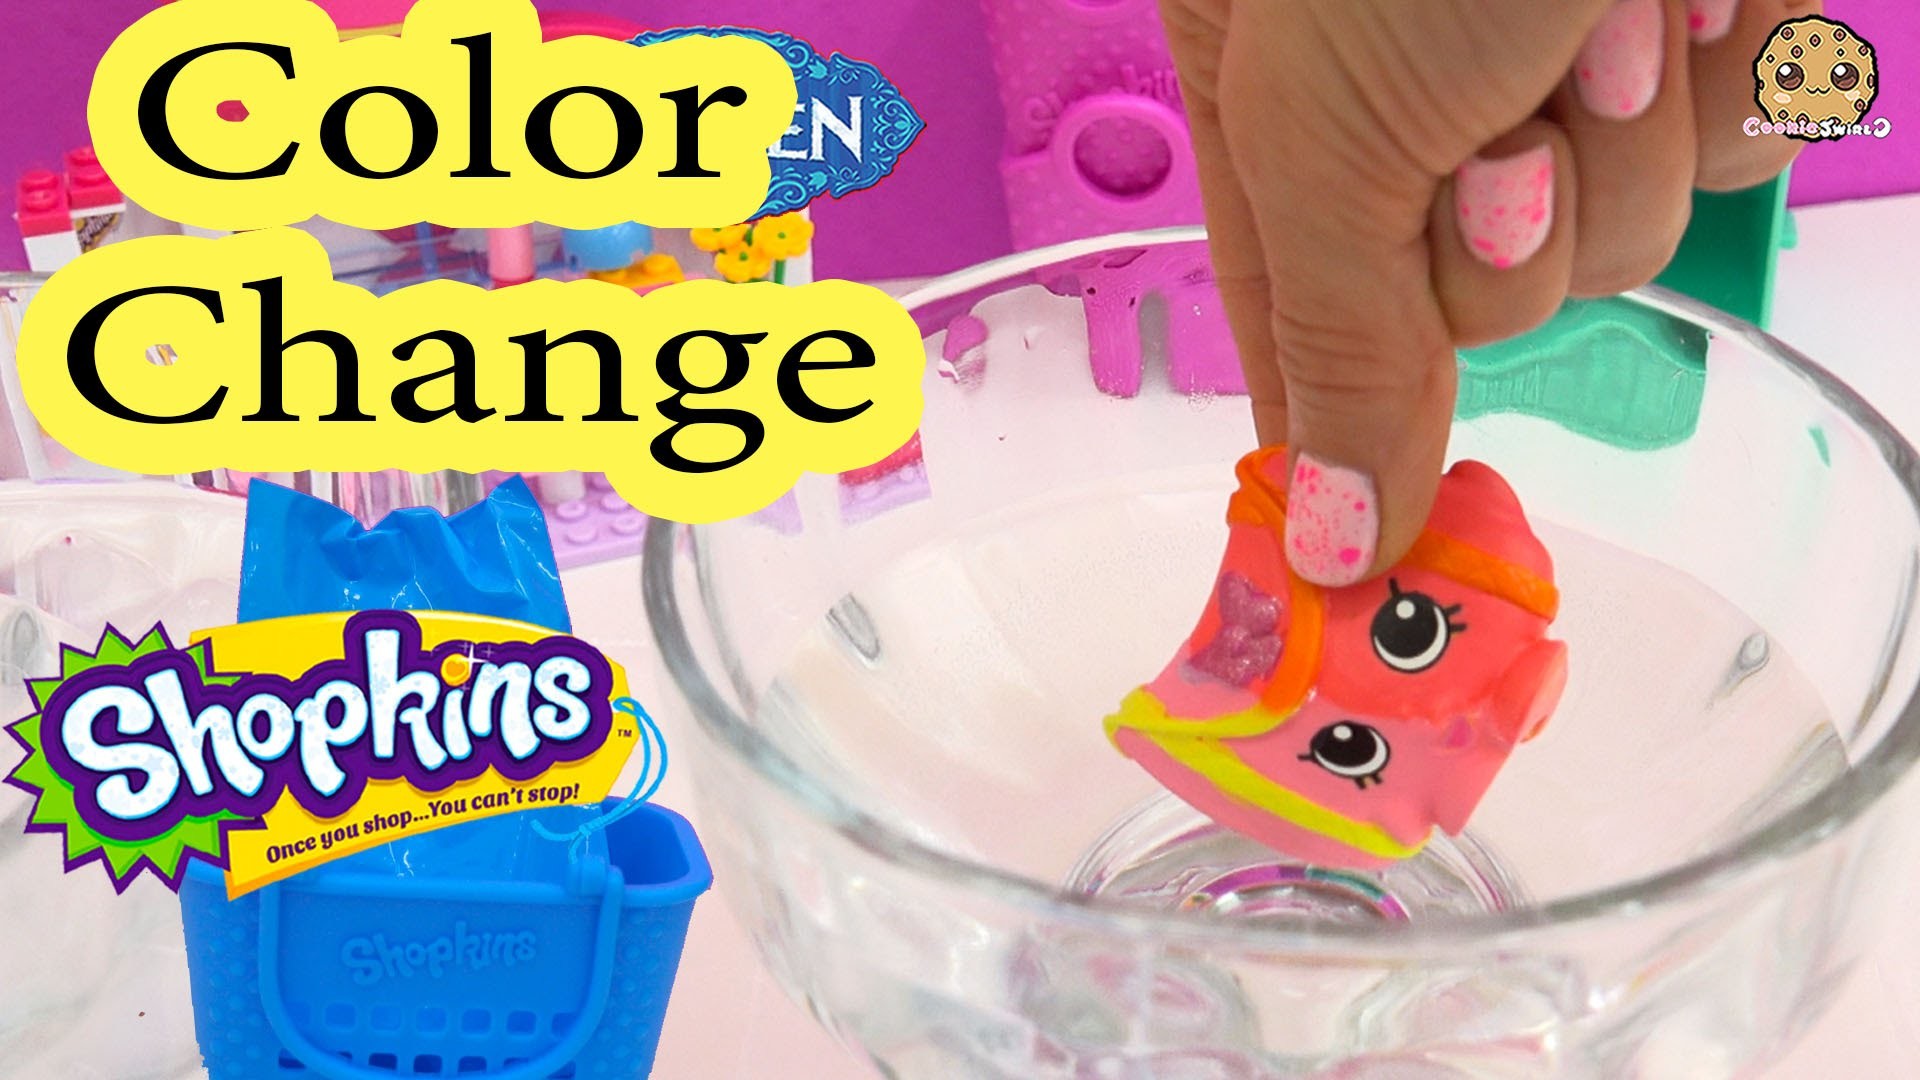 1920x1080 DIY Color Change Shopkins Mcdonalds Happy Meal Edition Toy How To Video -  YouTube